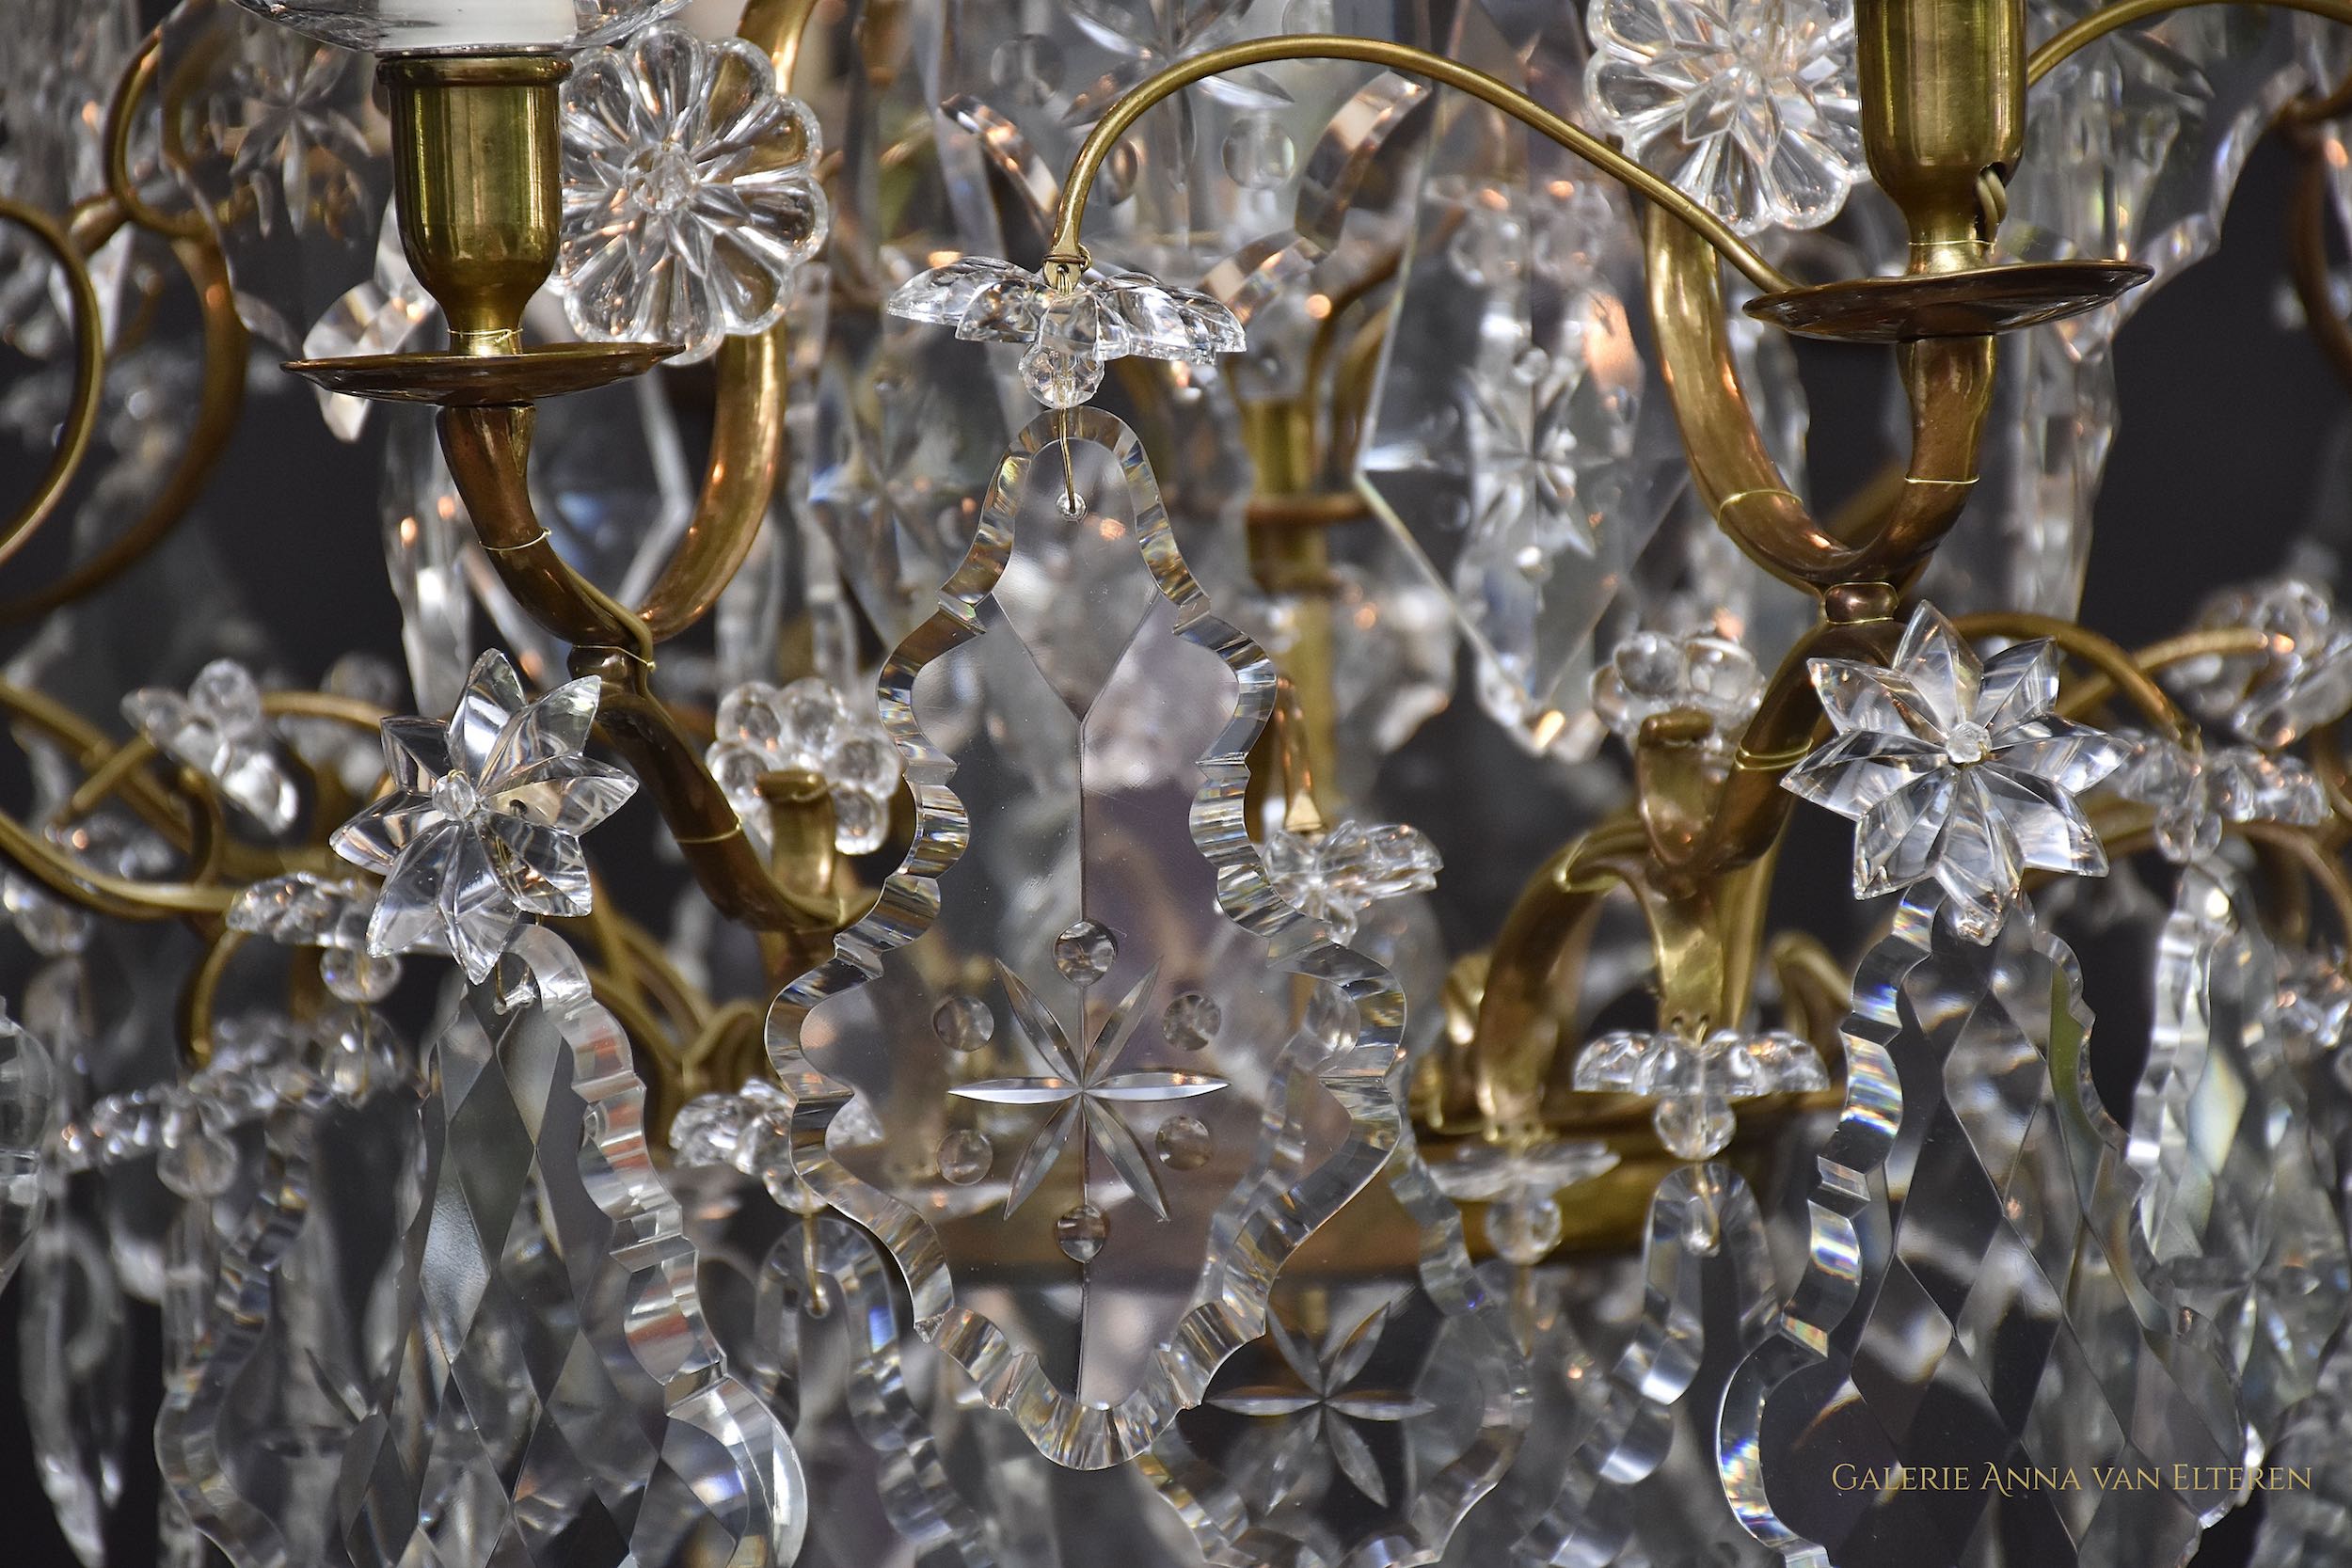 A pair of Rococo style crystal chandeliers